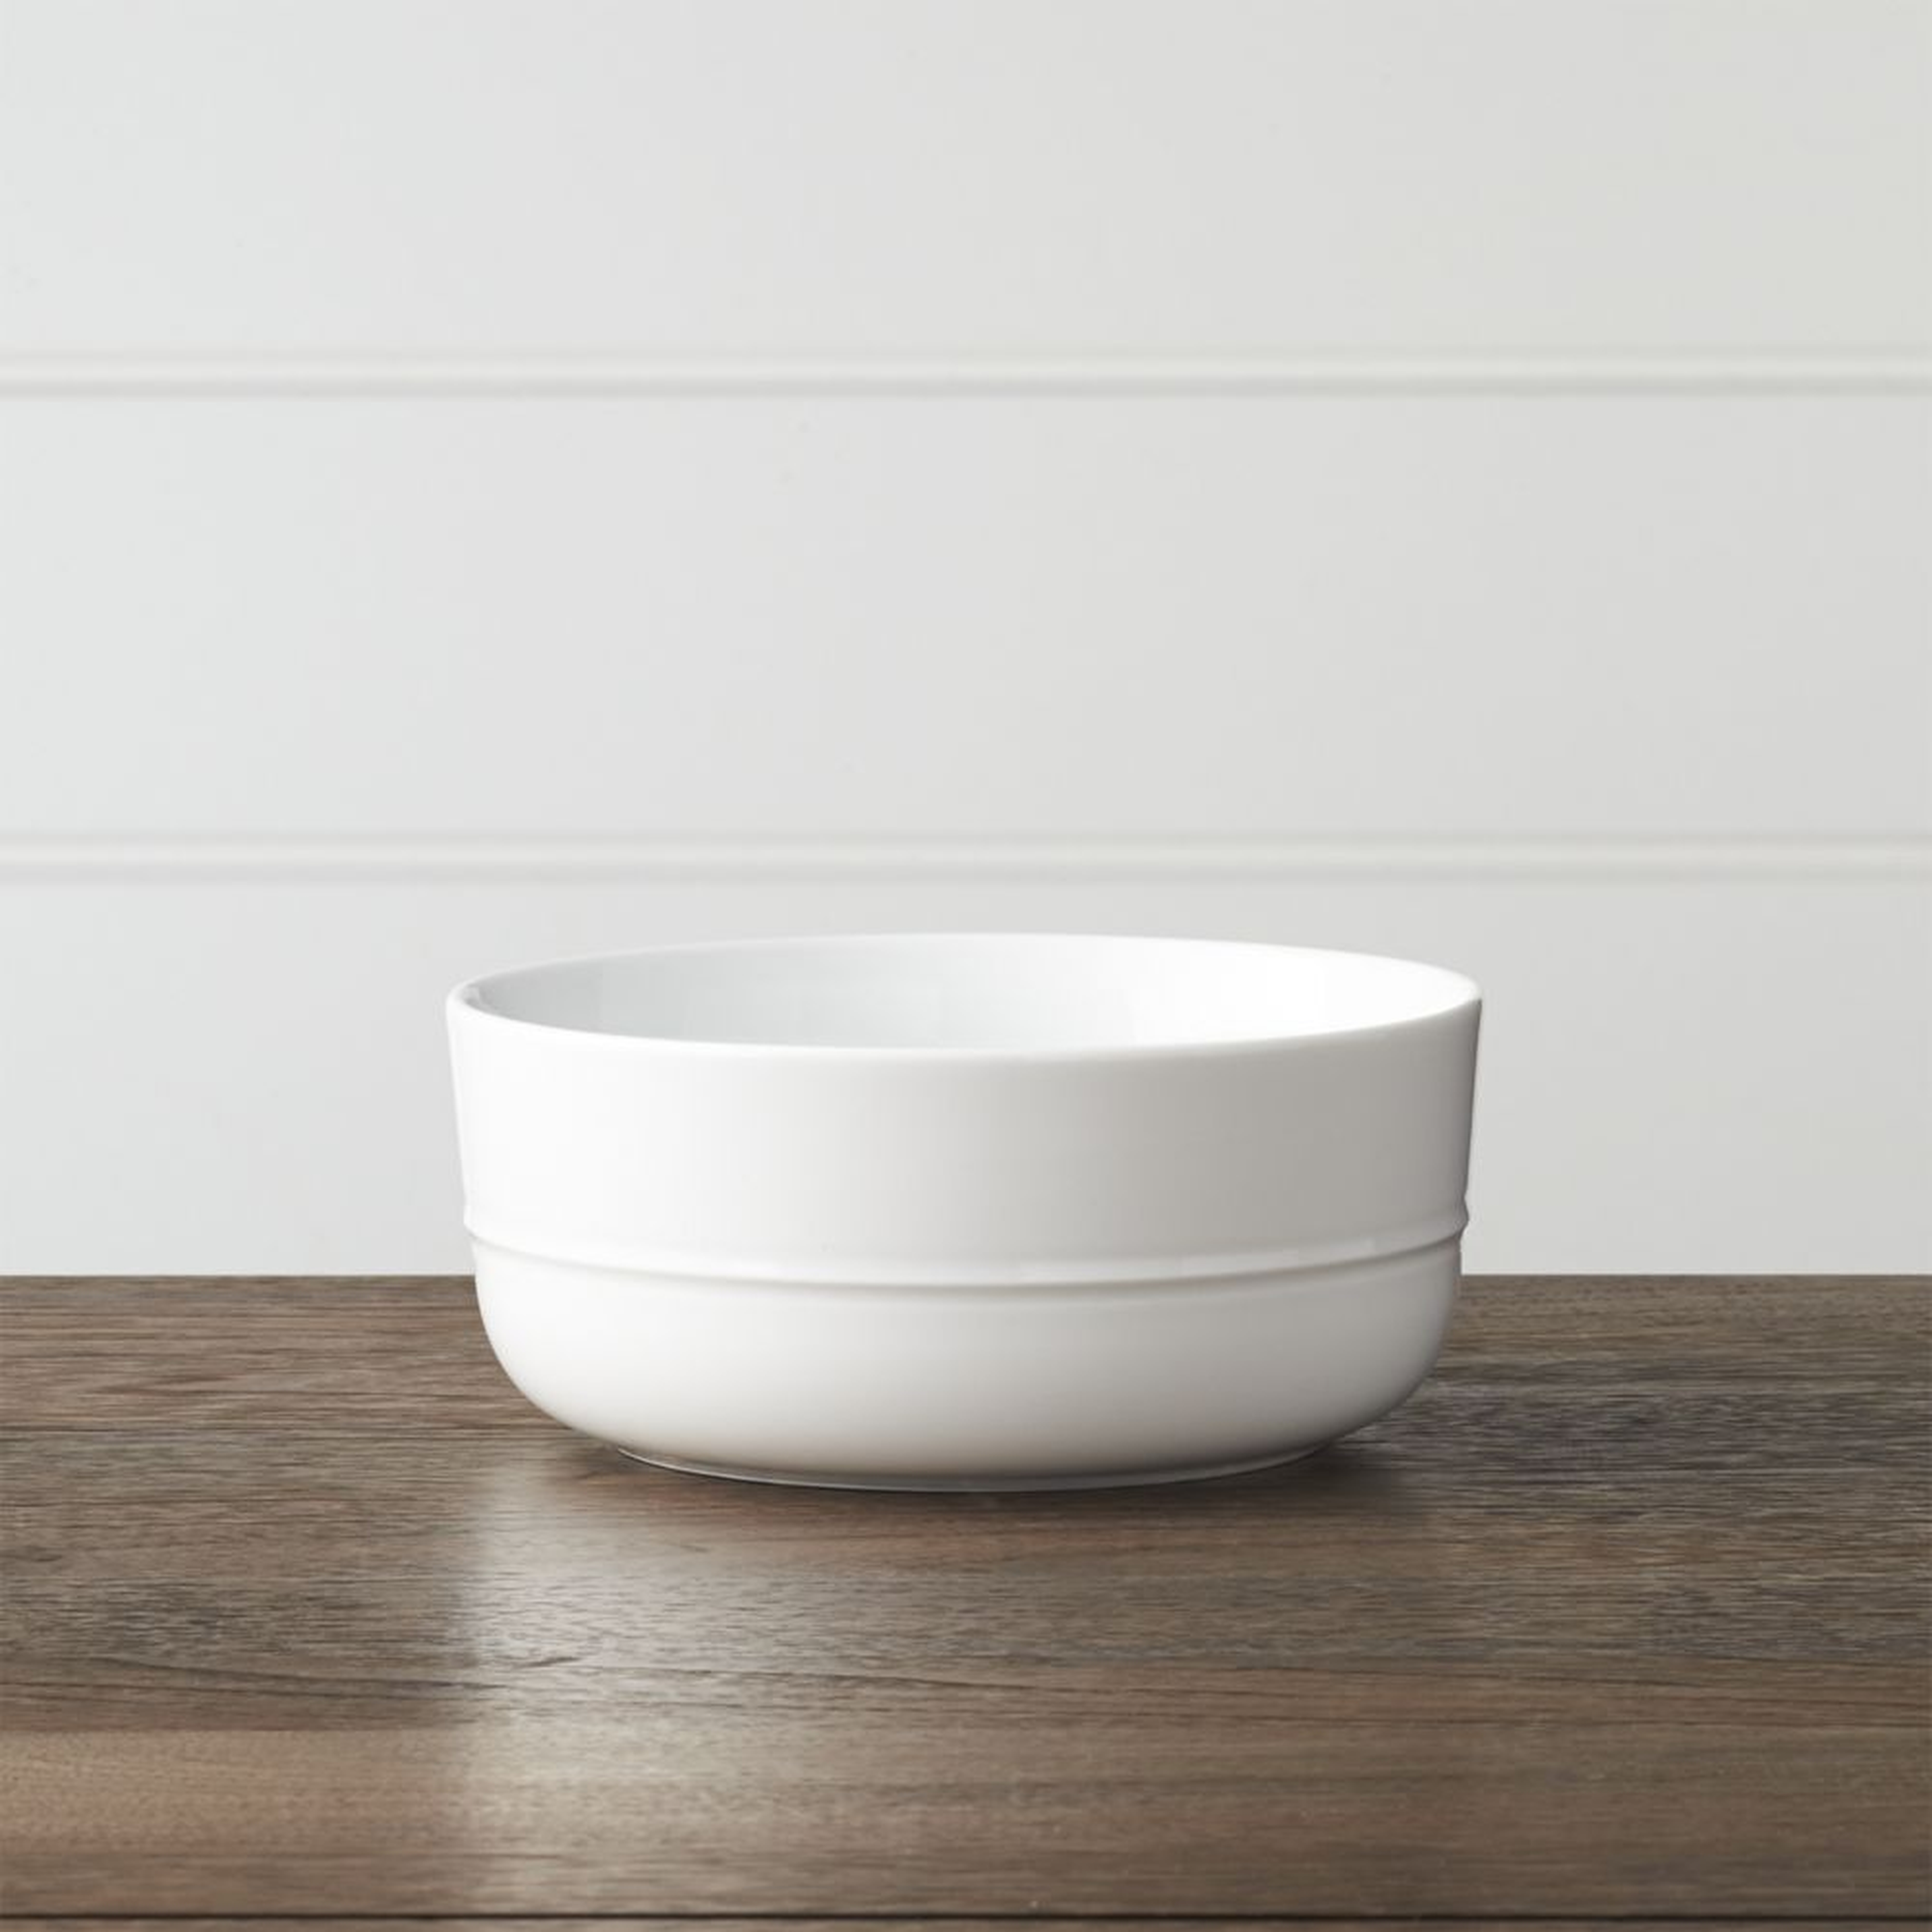 Hue White Cereal Bowl - Crate and Barrel